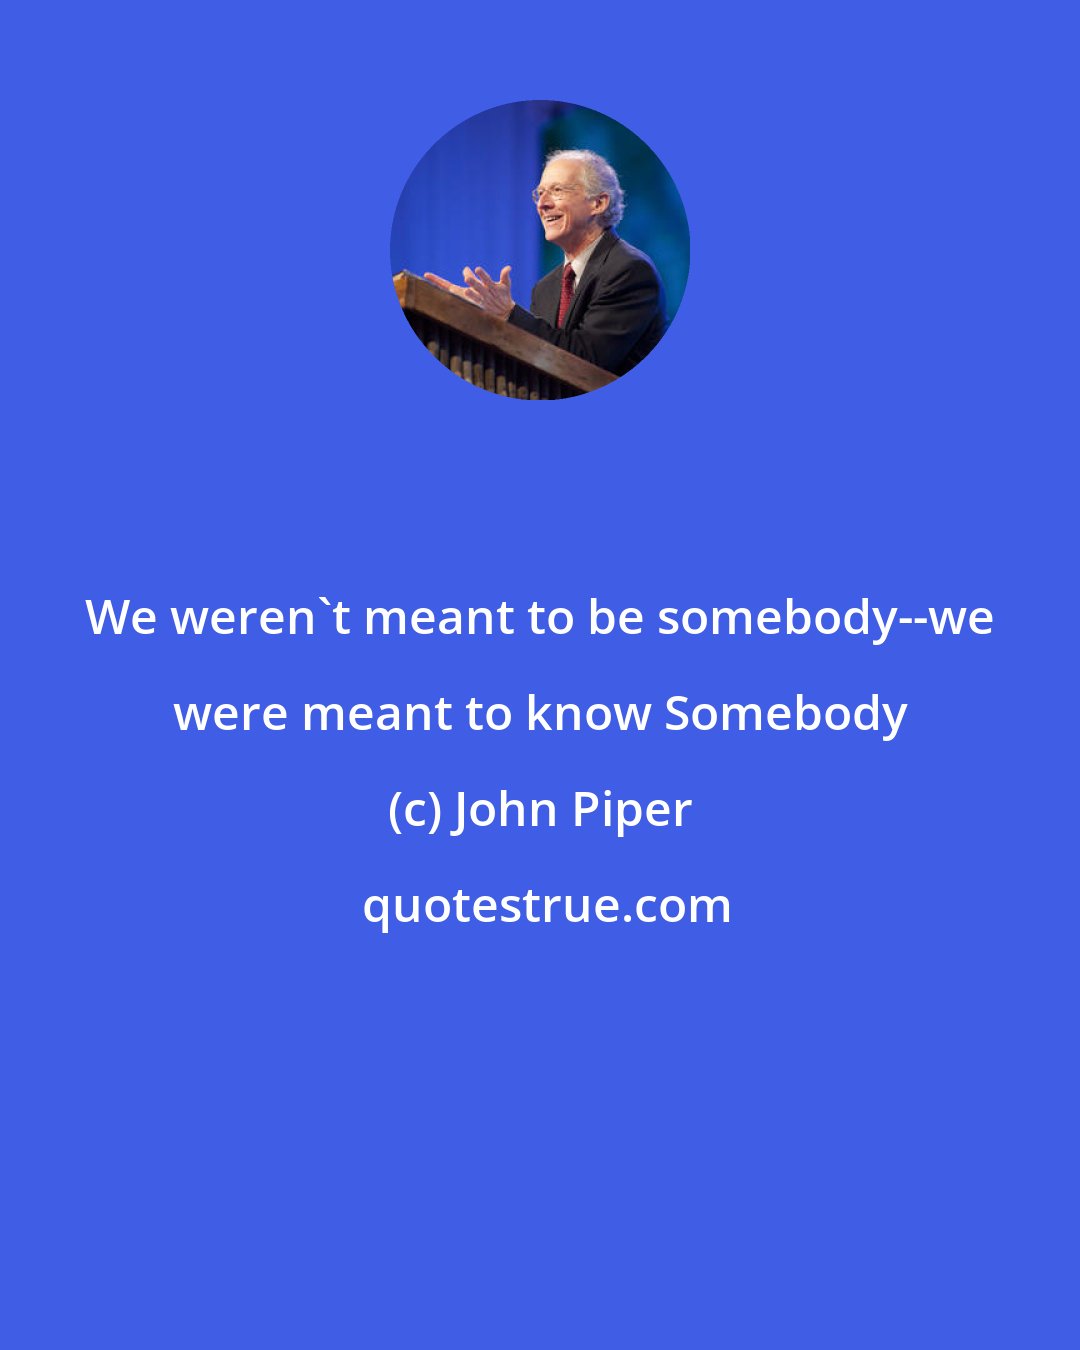 John Piper: We weren't meant to be somebody--we were meant to know Somebody